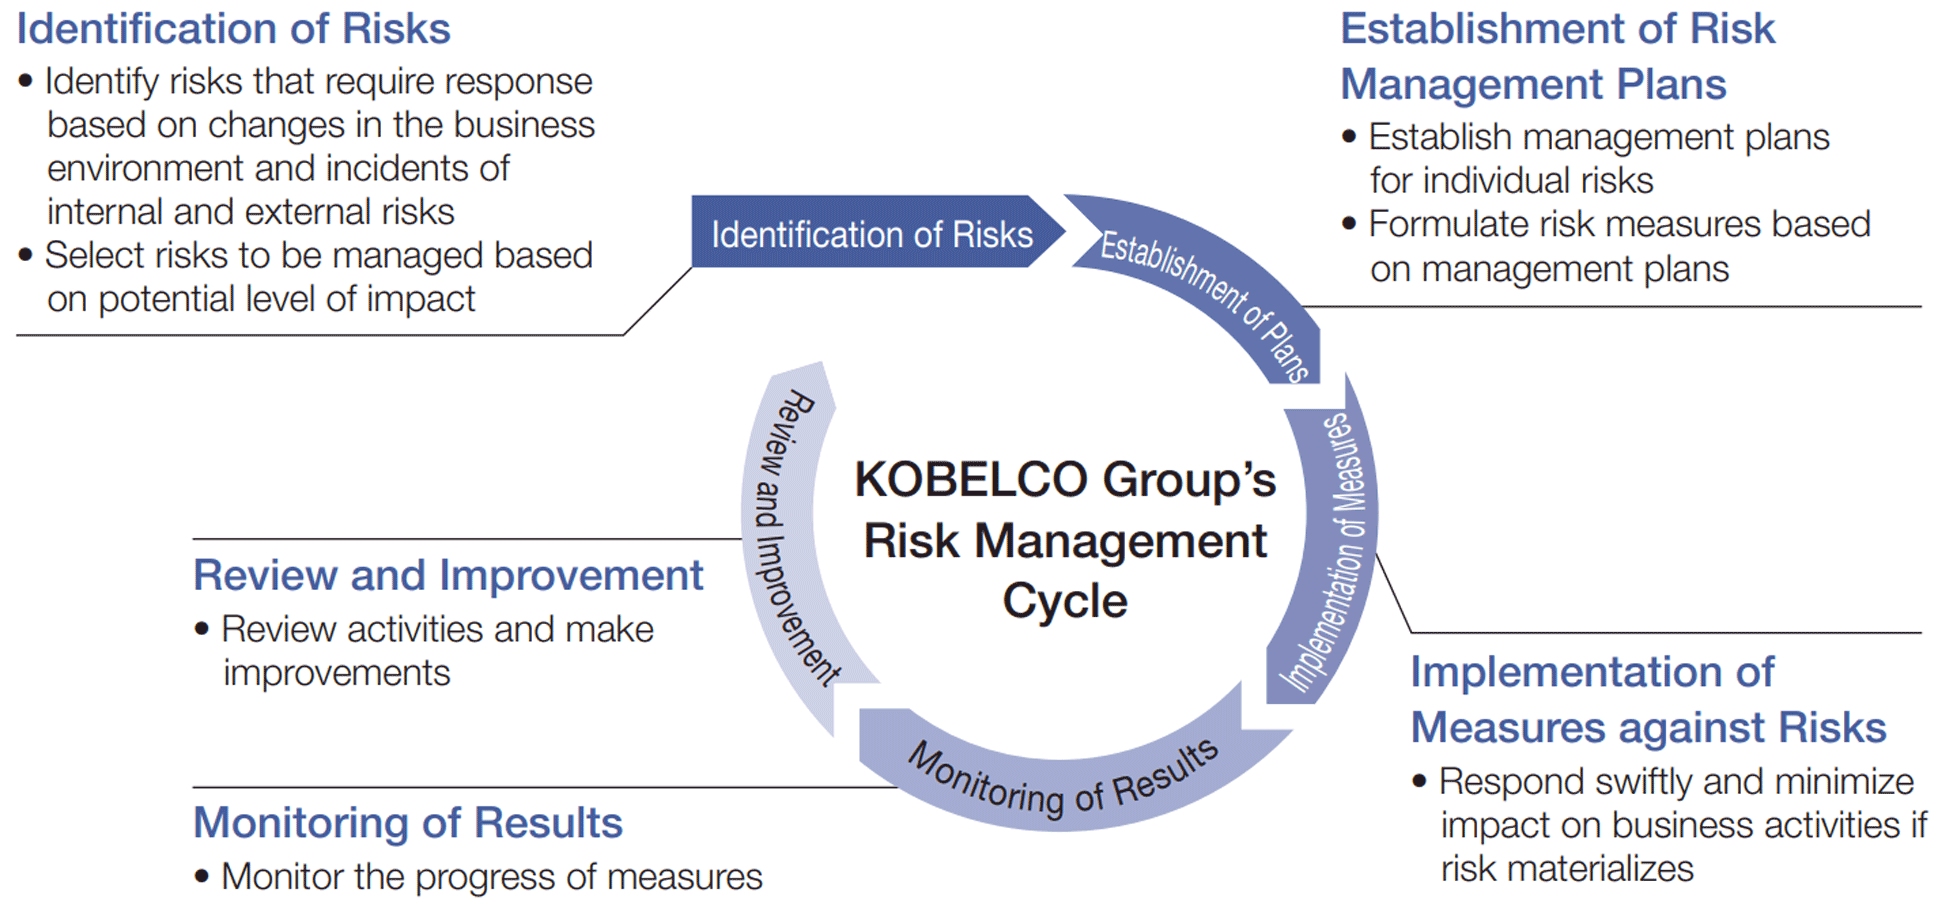 KOBELCO Group’s Risk Management Cycle